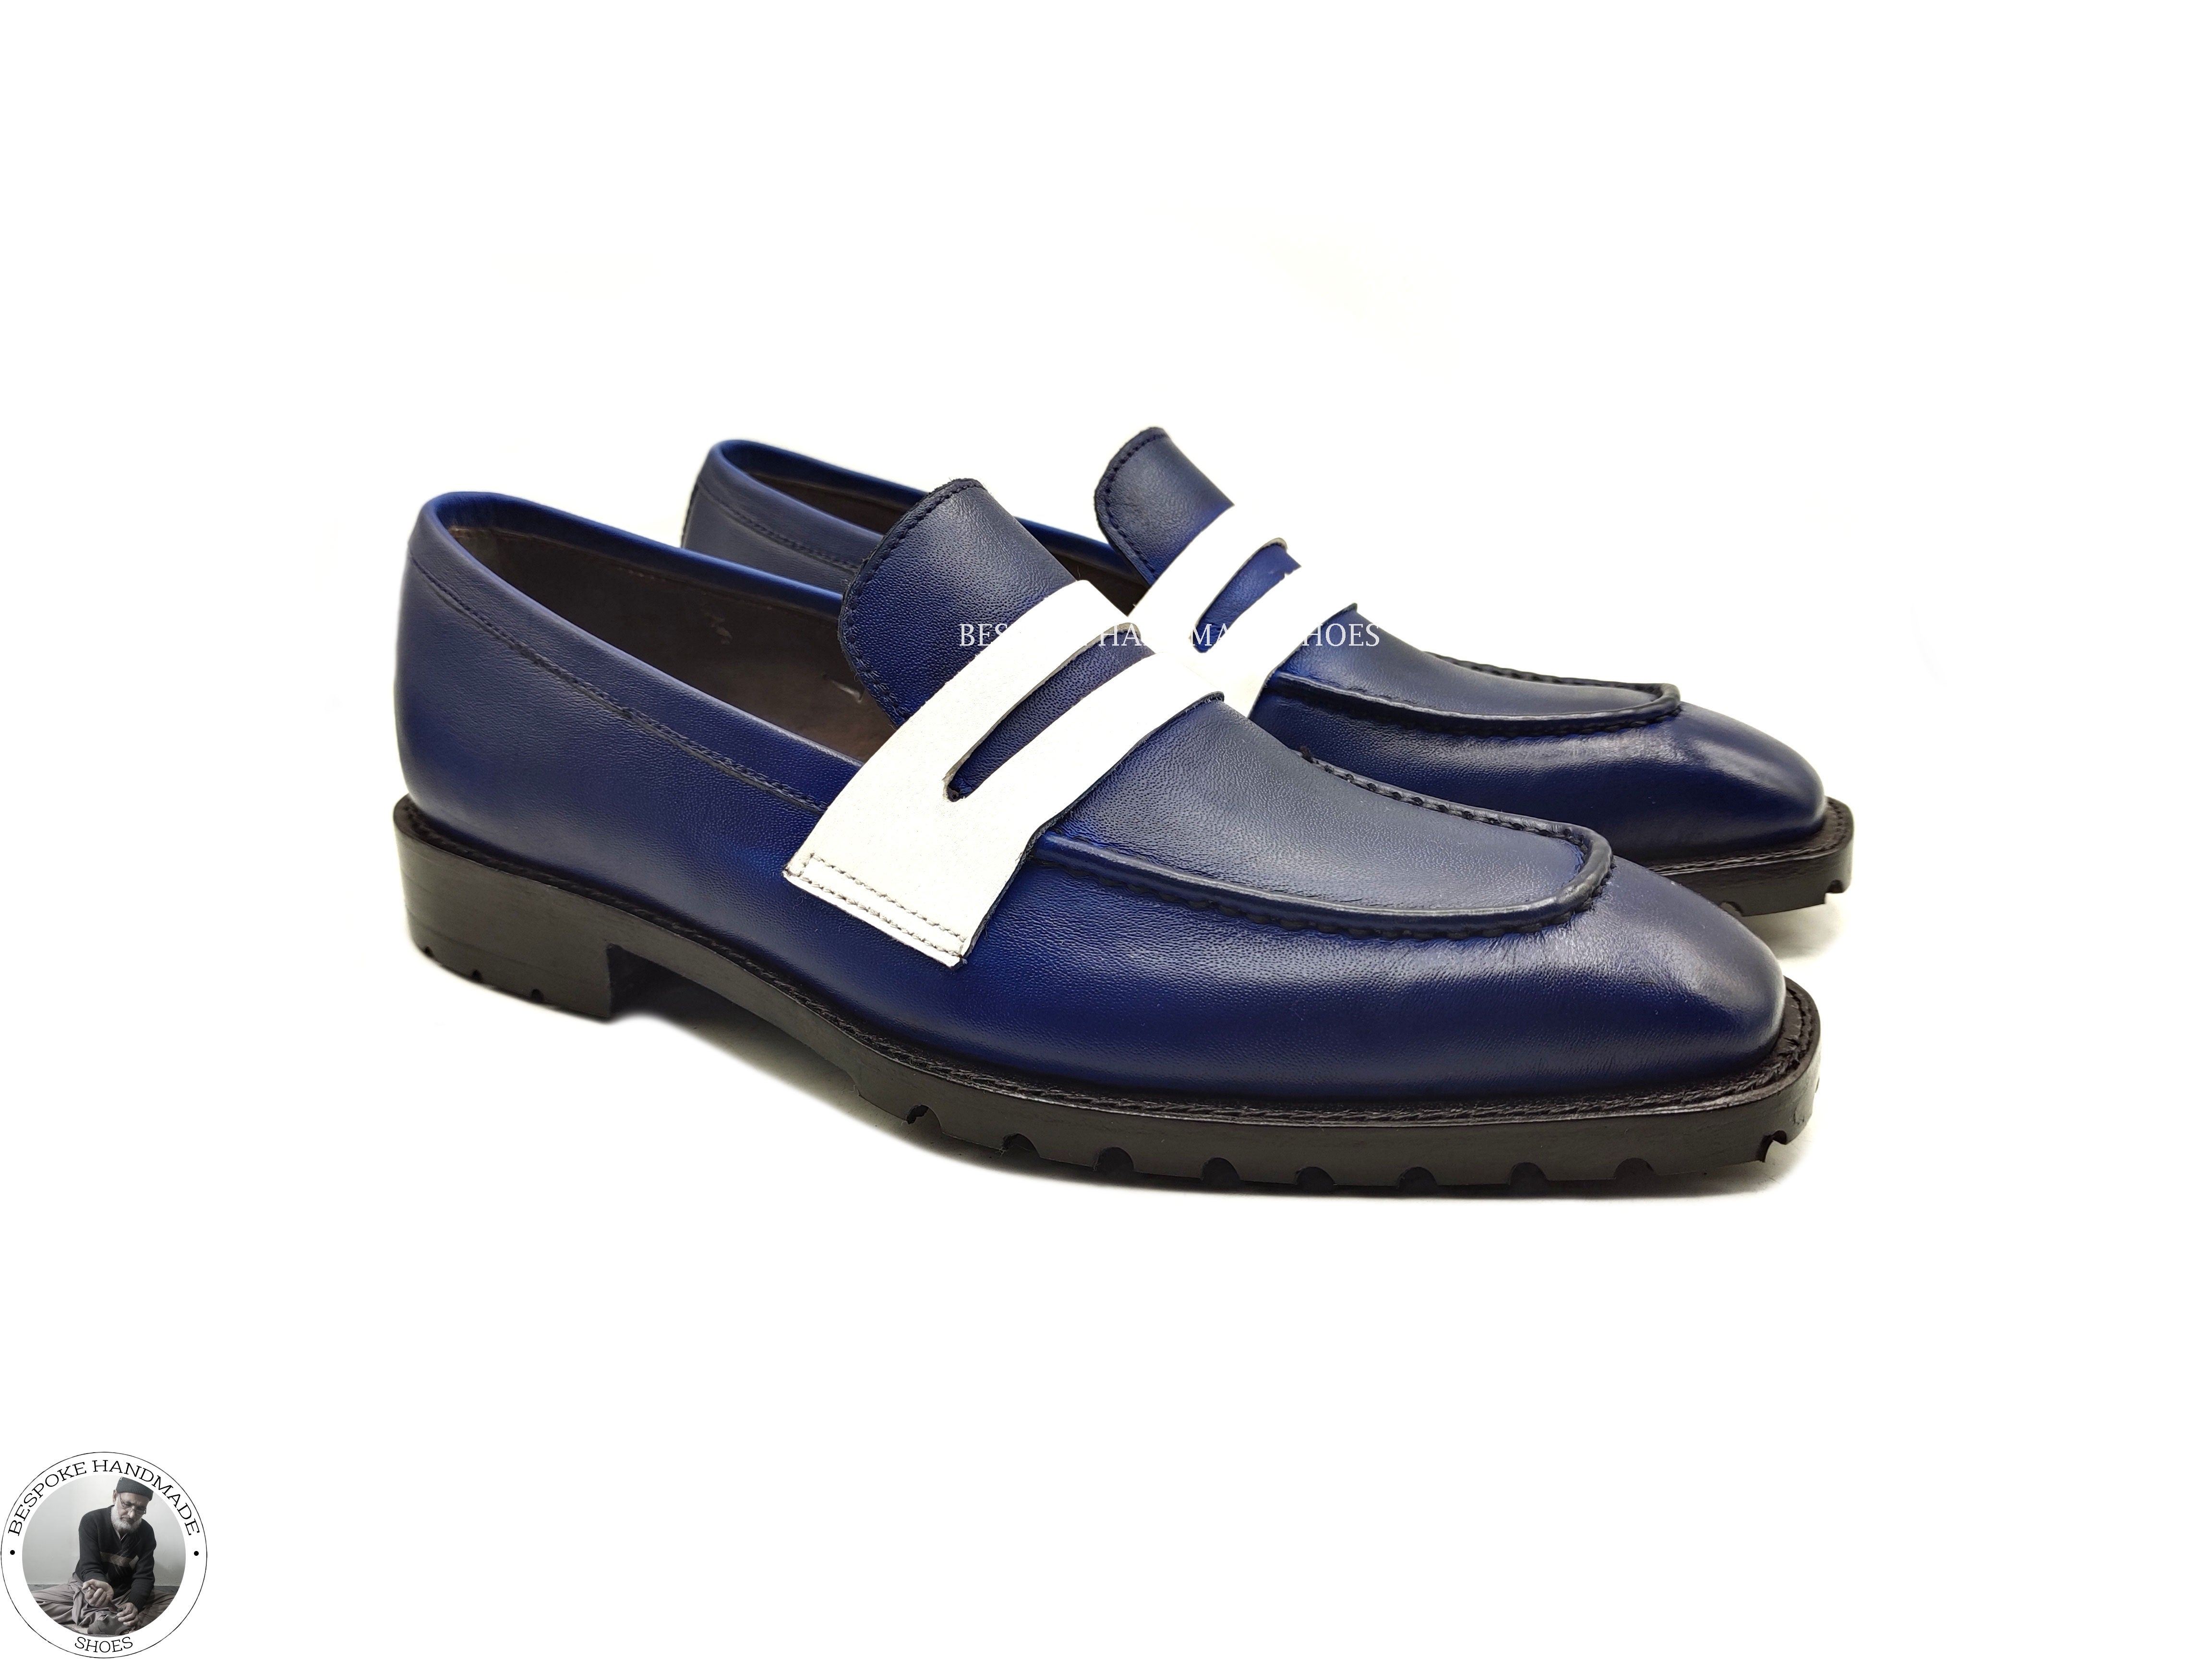 Buy Men’s Genuine Blue & White Leather Genuine Slip on Loafer Style Dress / Casual Shoes